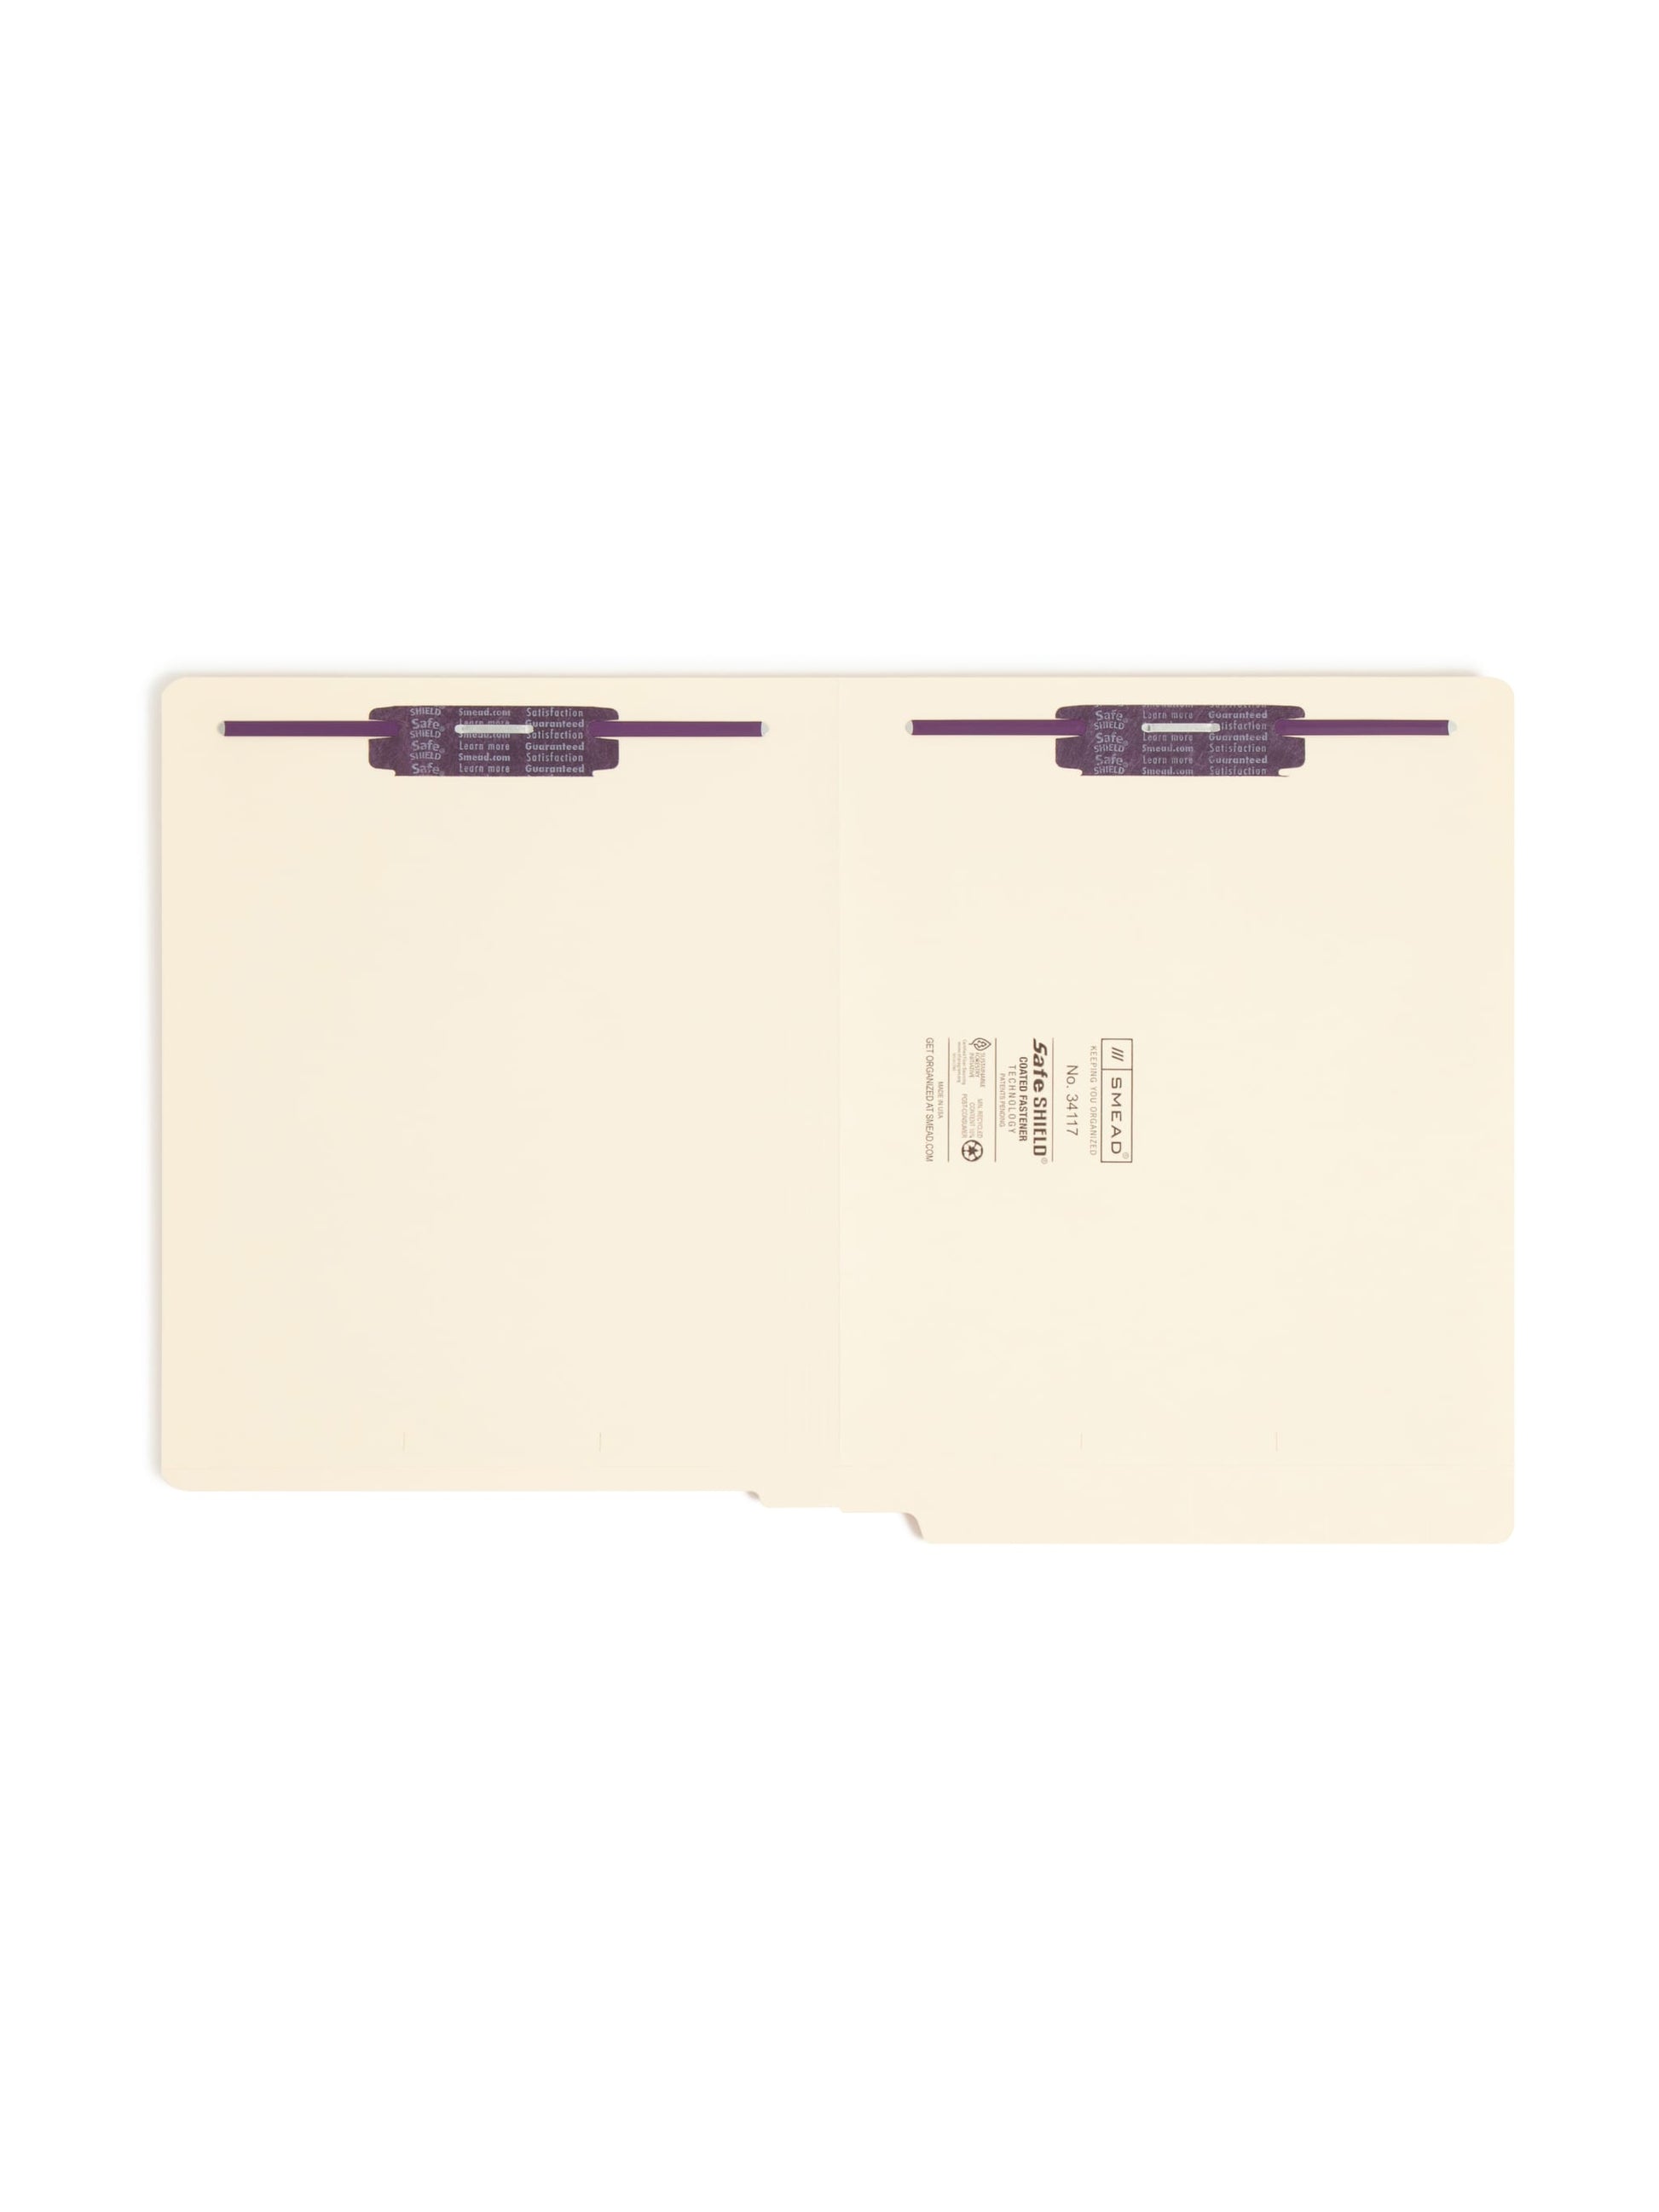 Shelf-Master® Reinforced End Tab Fastener File Folders with Antimicrobial Product Protection, Straight-Cut Tab, 2 Fasteners, Bi-lingual Packaging, Manila Color, Letter Size, Set of 50, 086486341172